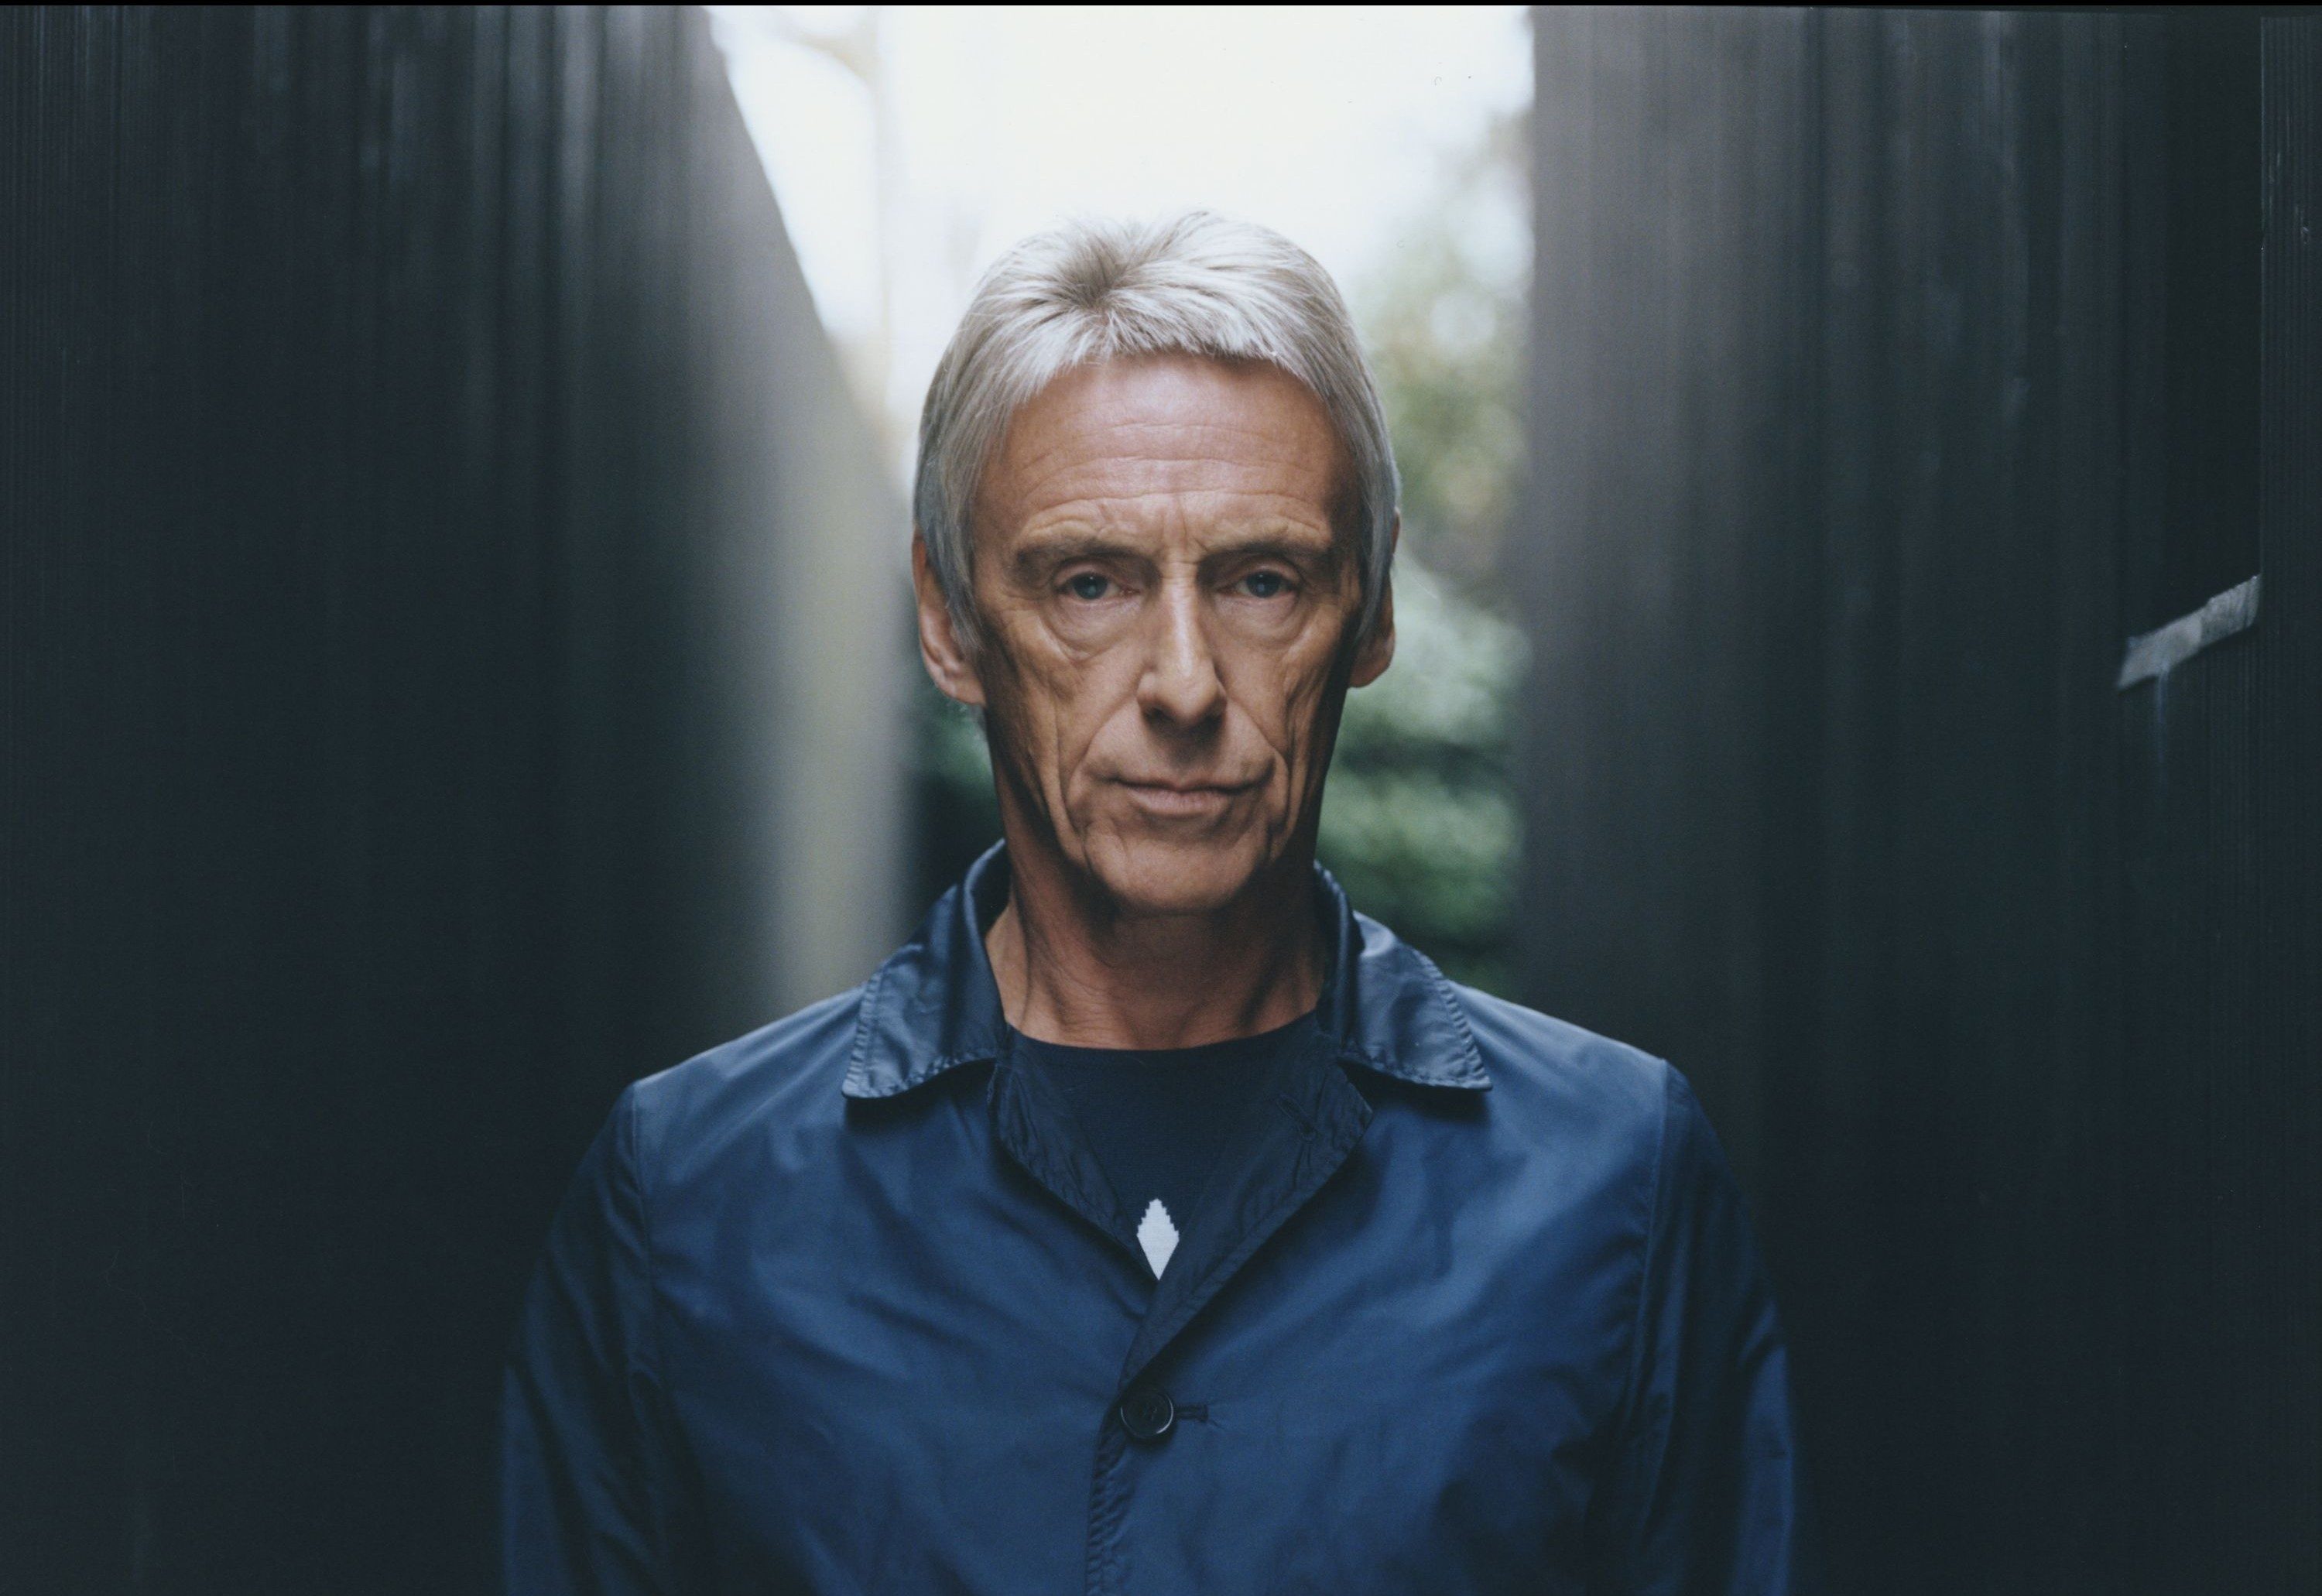 Paul Weller At The Orpheum Theatre On Sept. 27 & 28